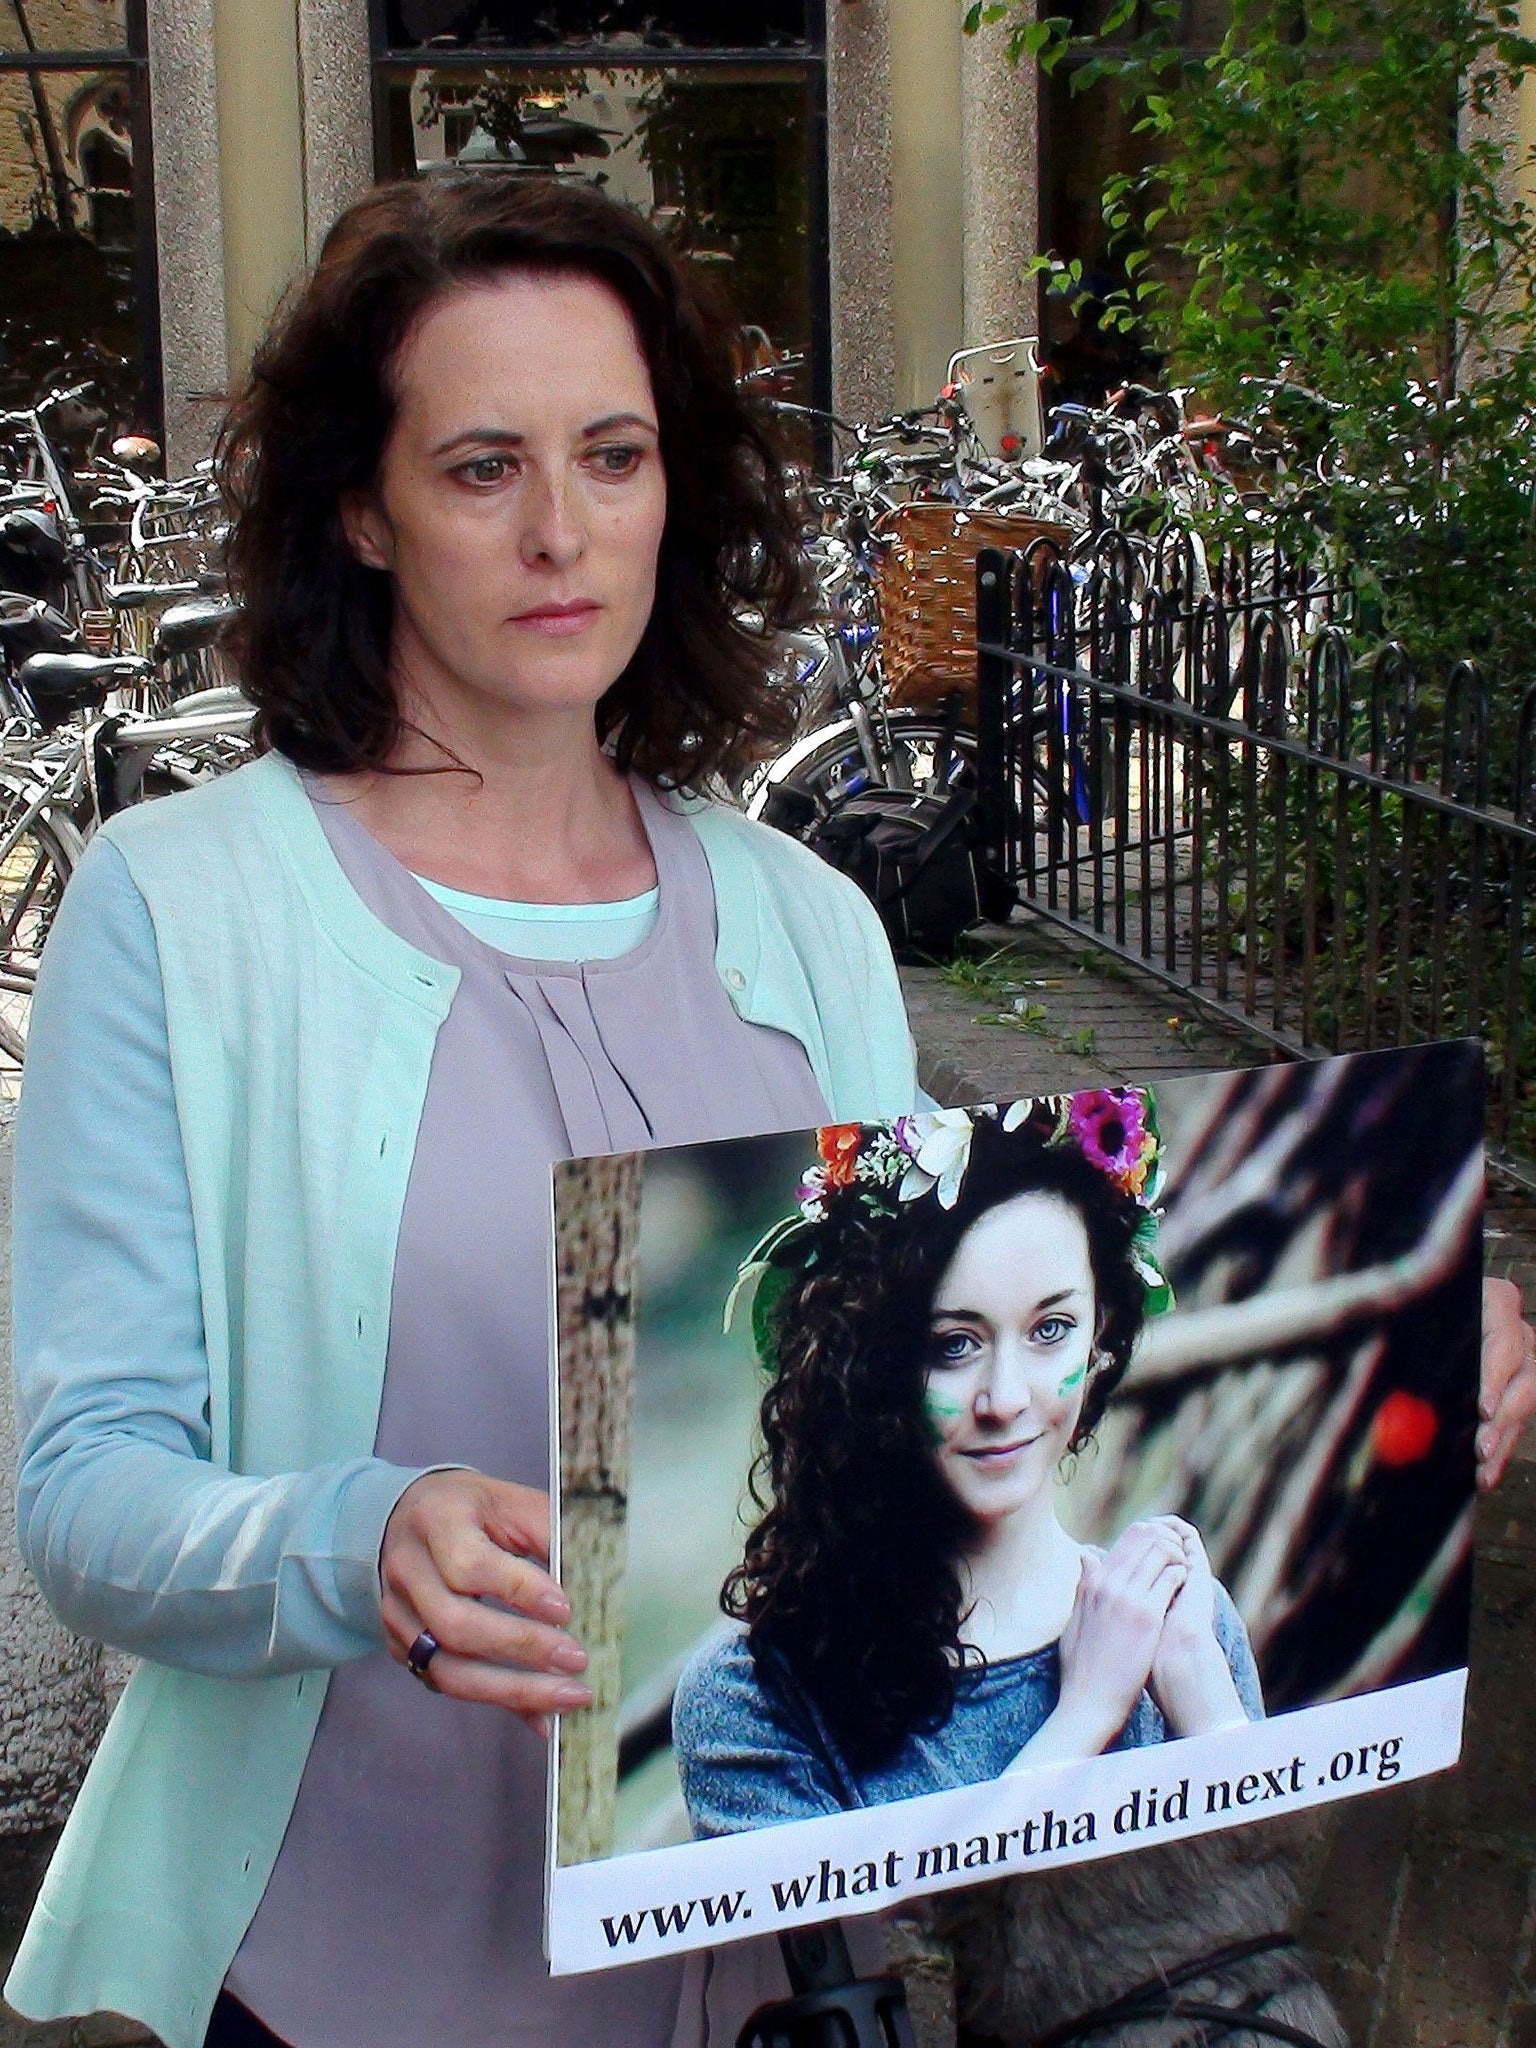 Anne-Marie Cockburn, the mother of 15-year-old Martha Fernback, who died after taking ecstasy